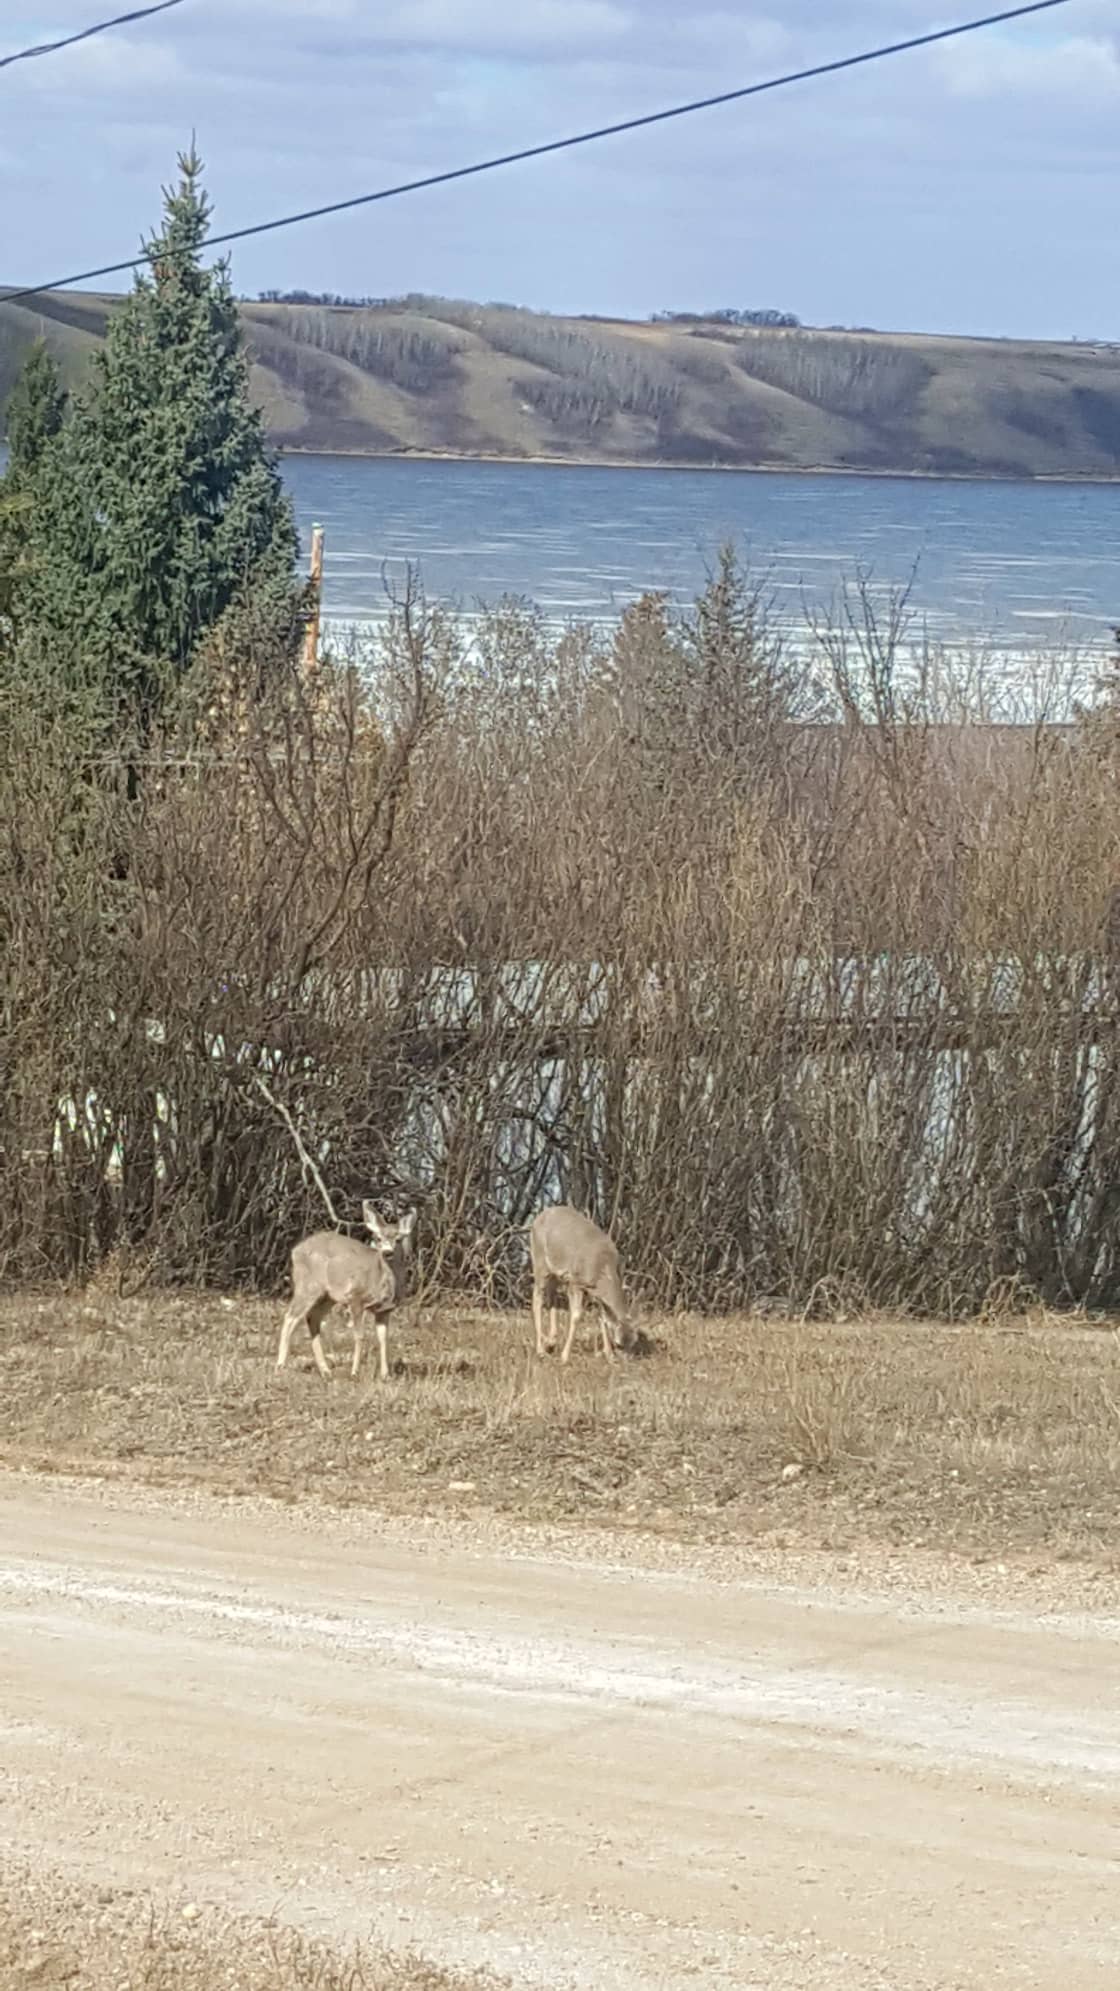 Some of our friendly beach residents you will likely see on the property or roads around the beach. If you're lucky you may see a momma with her triplets born this year